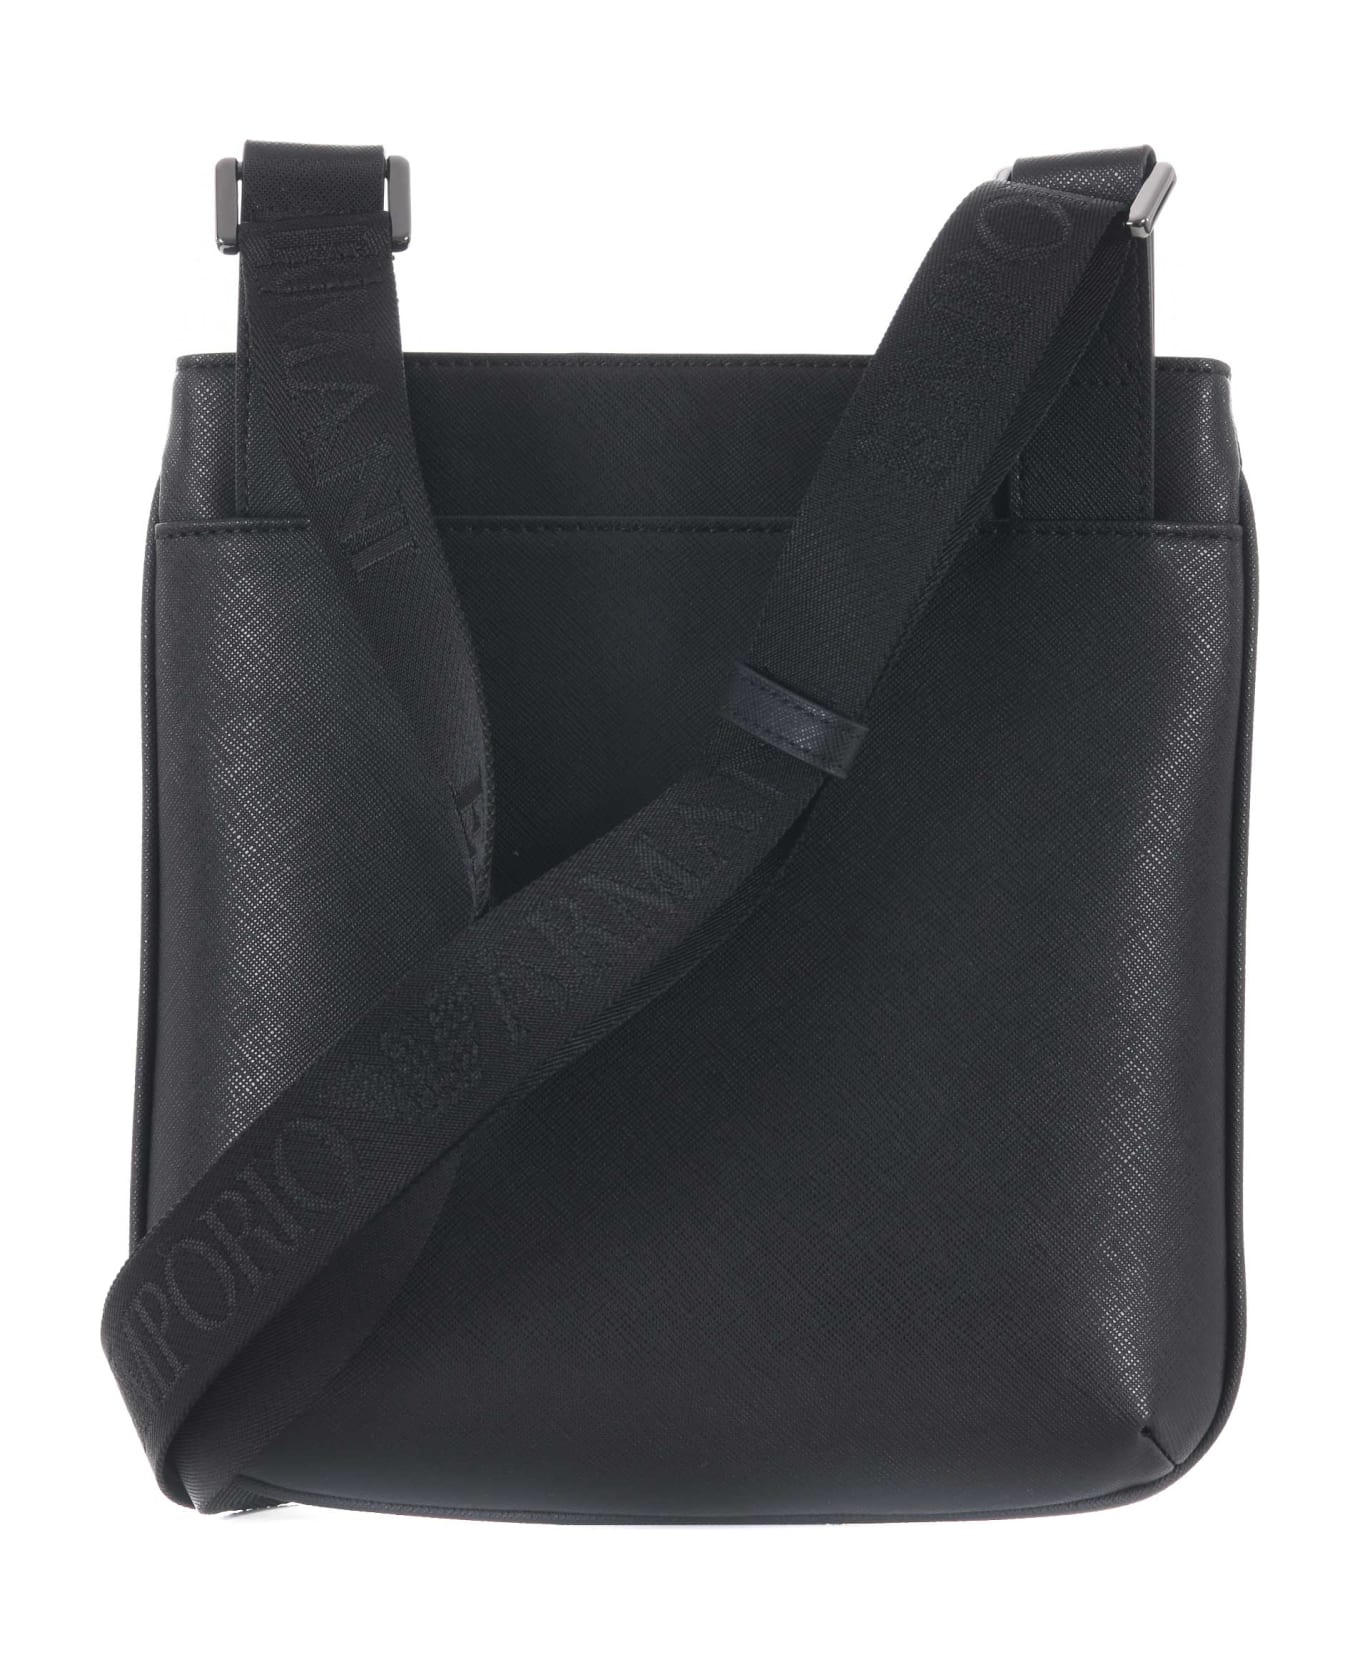 Emporio Armani Shoulder Bag From The 'sustainable' Collection - Black